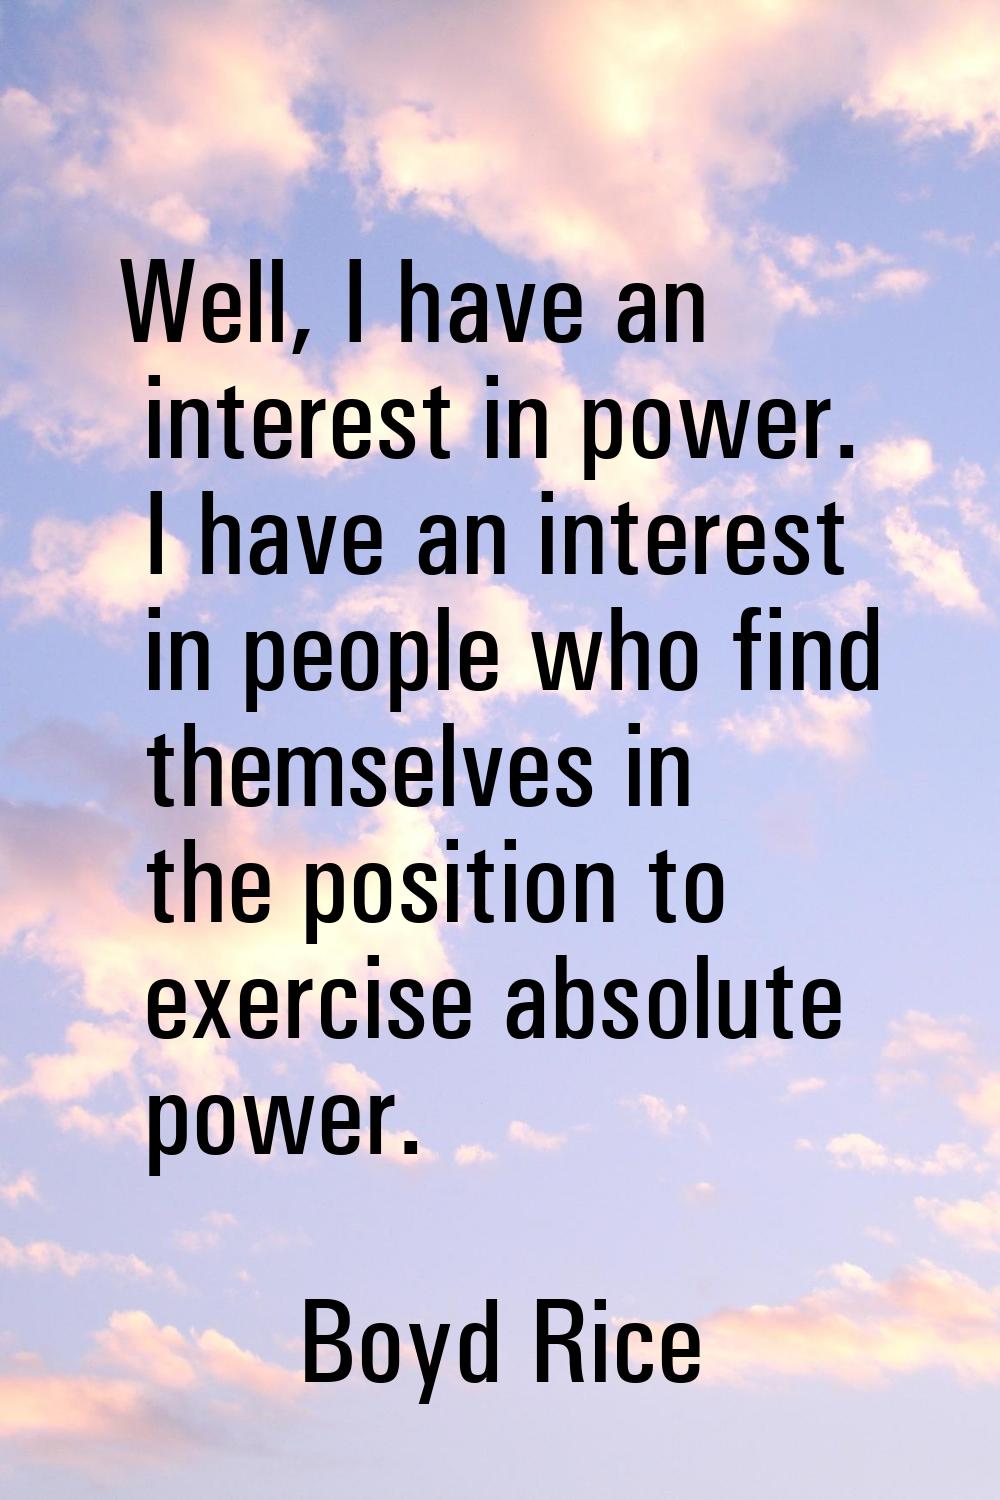 Well, I have an interest in power. I have an interest in people who find themselves in the position